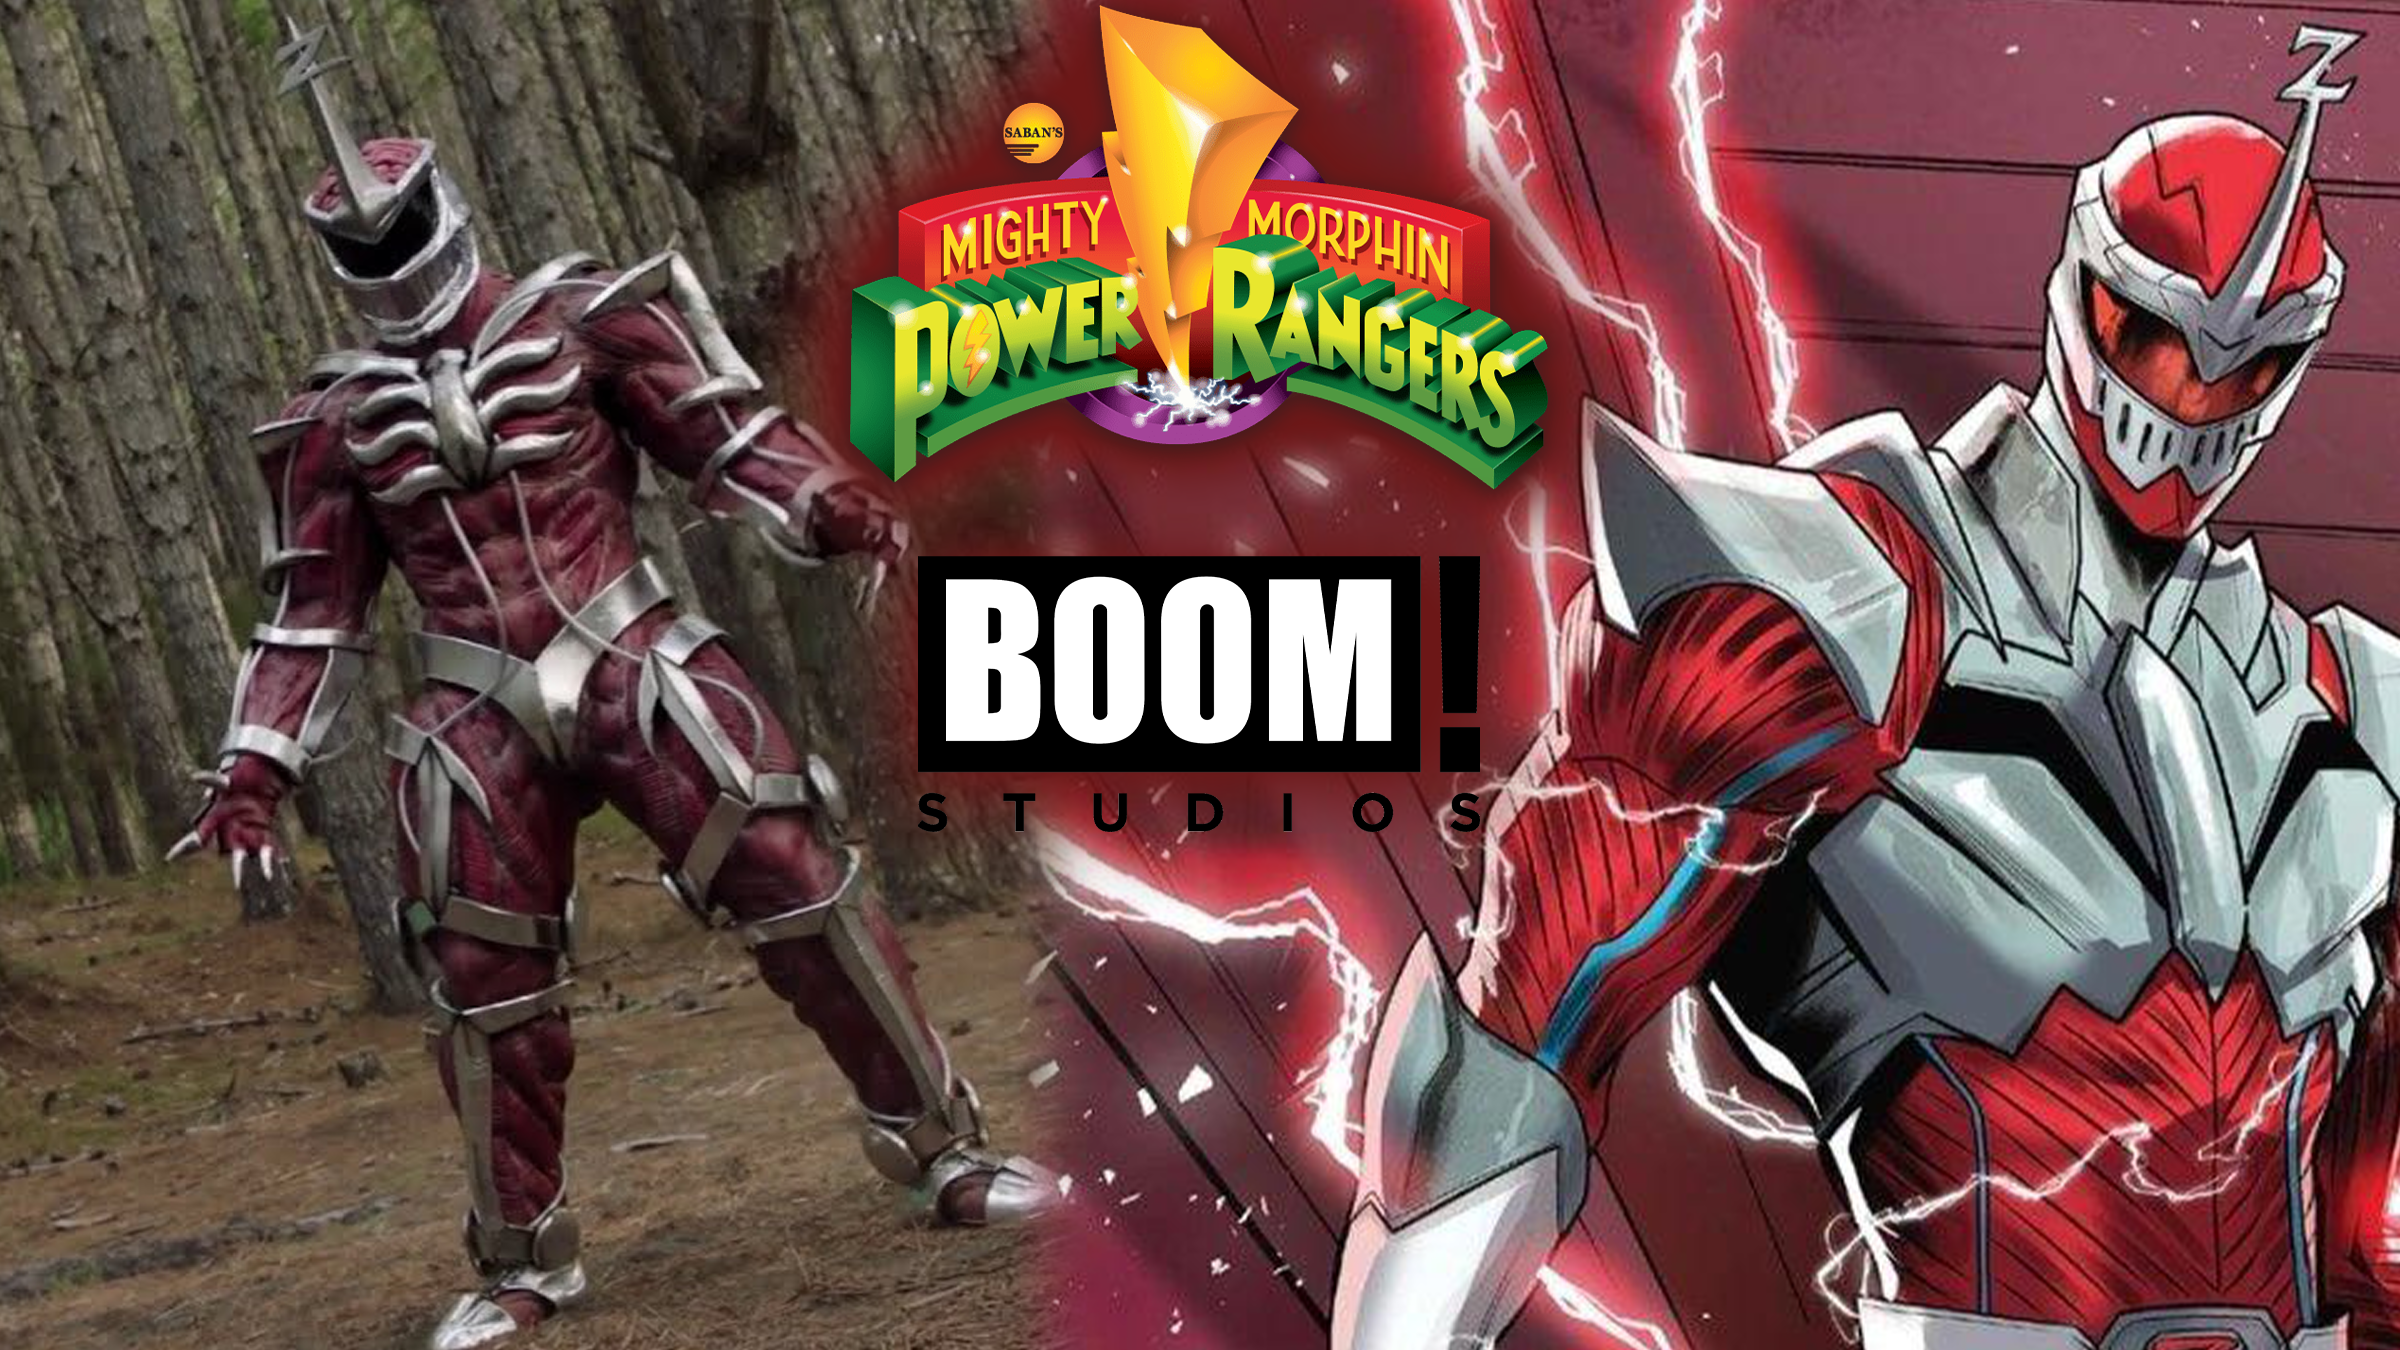 Lord Zedd Morphs in Mighty Morphin Power Rangers #106 and Fans Will Never Be the Same